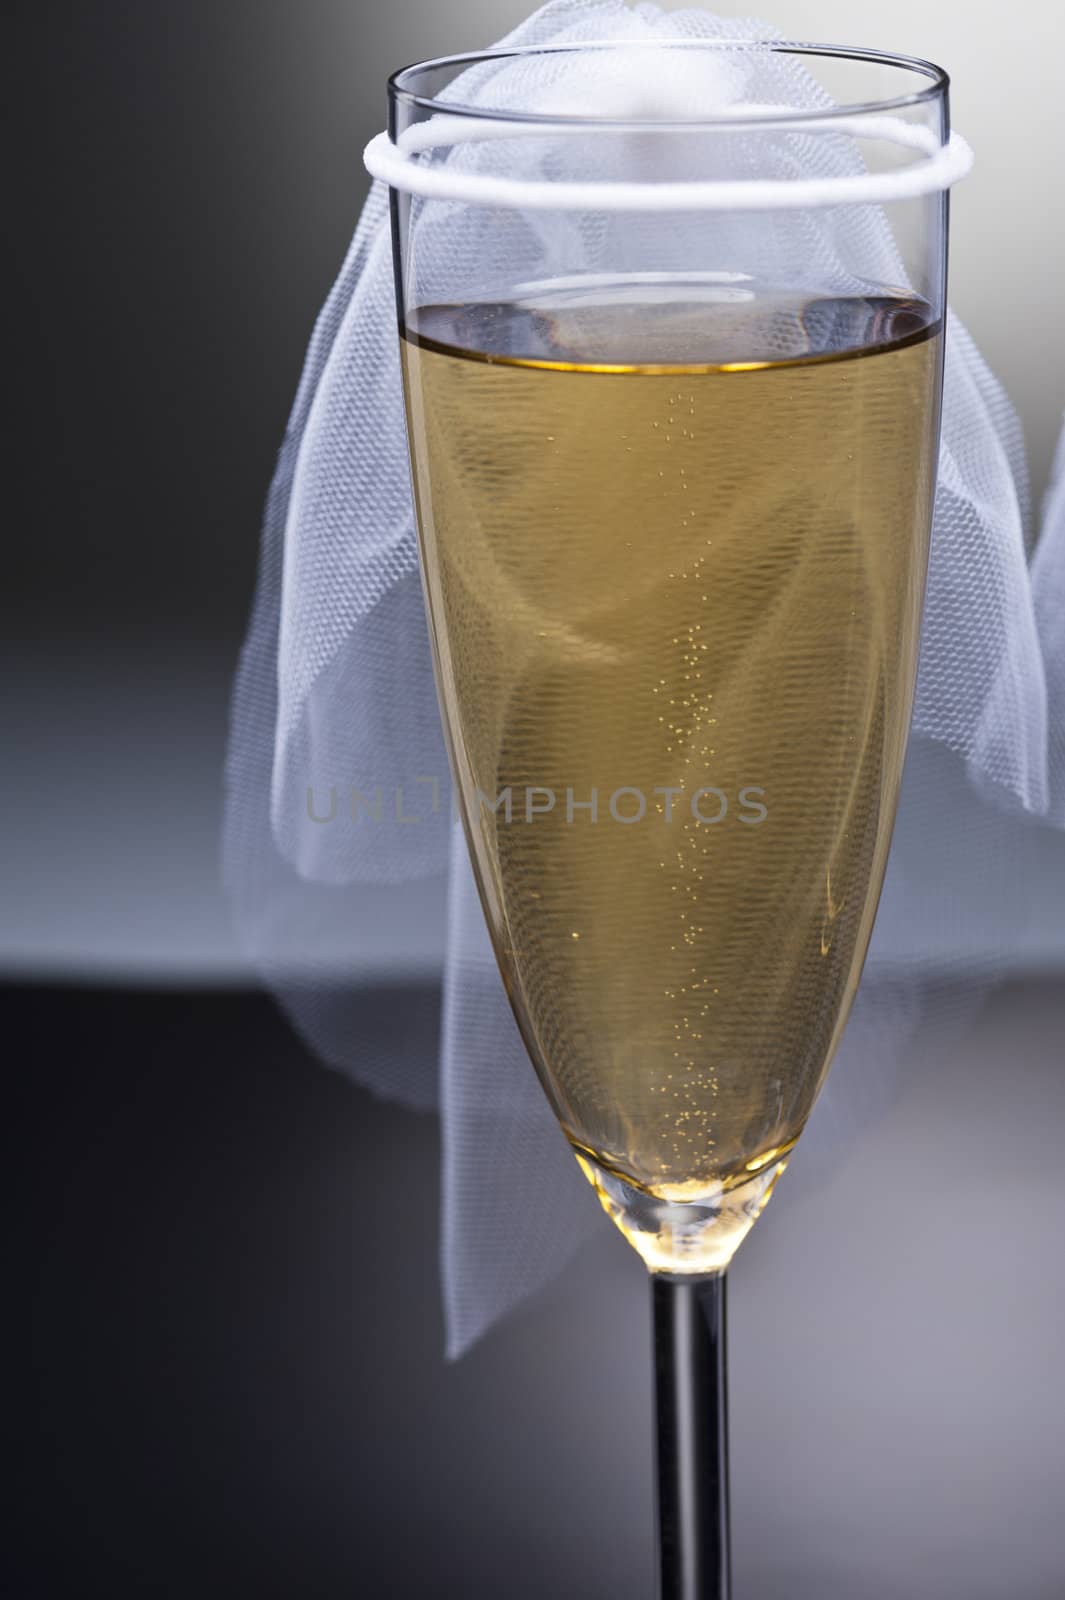 Champagne glass with conceptual heterosexual decoration